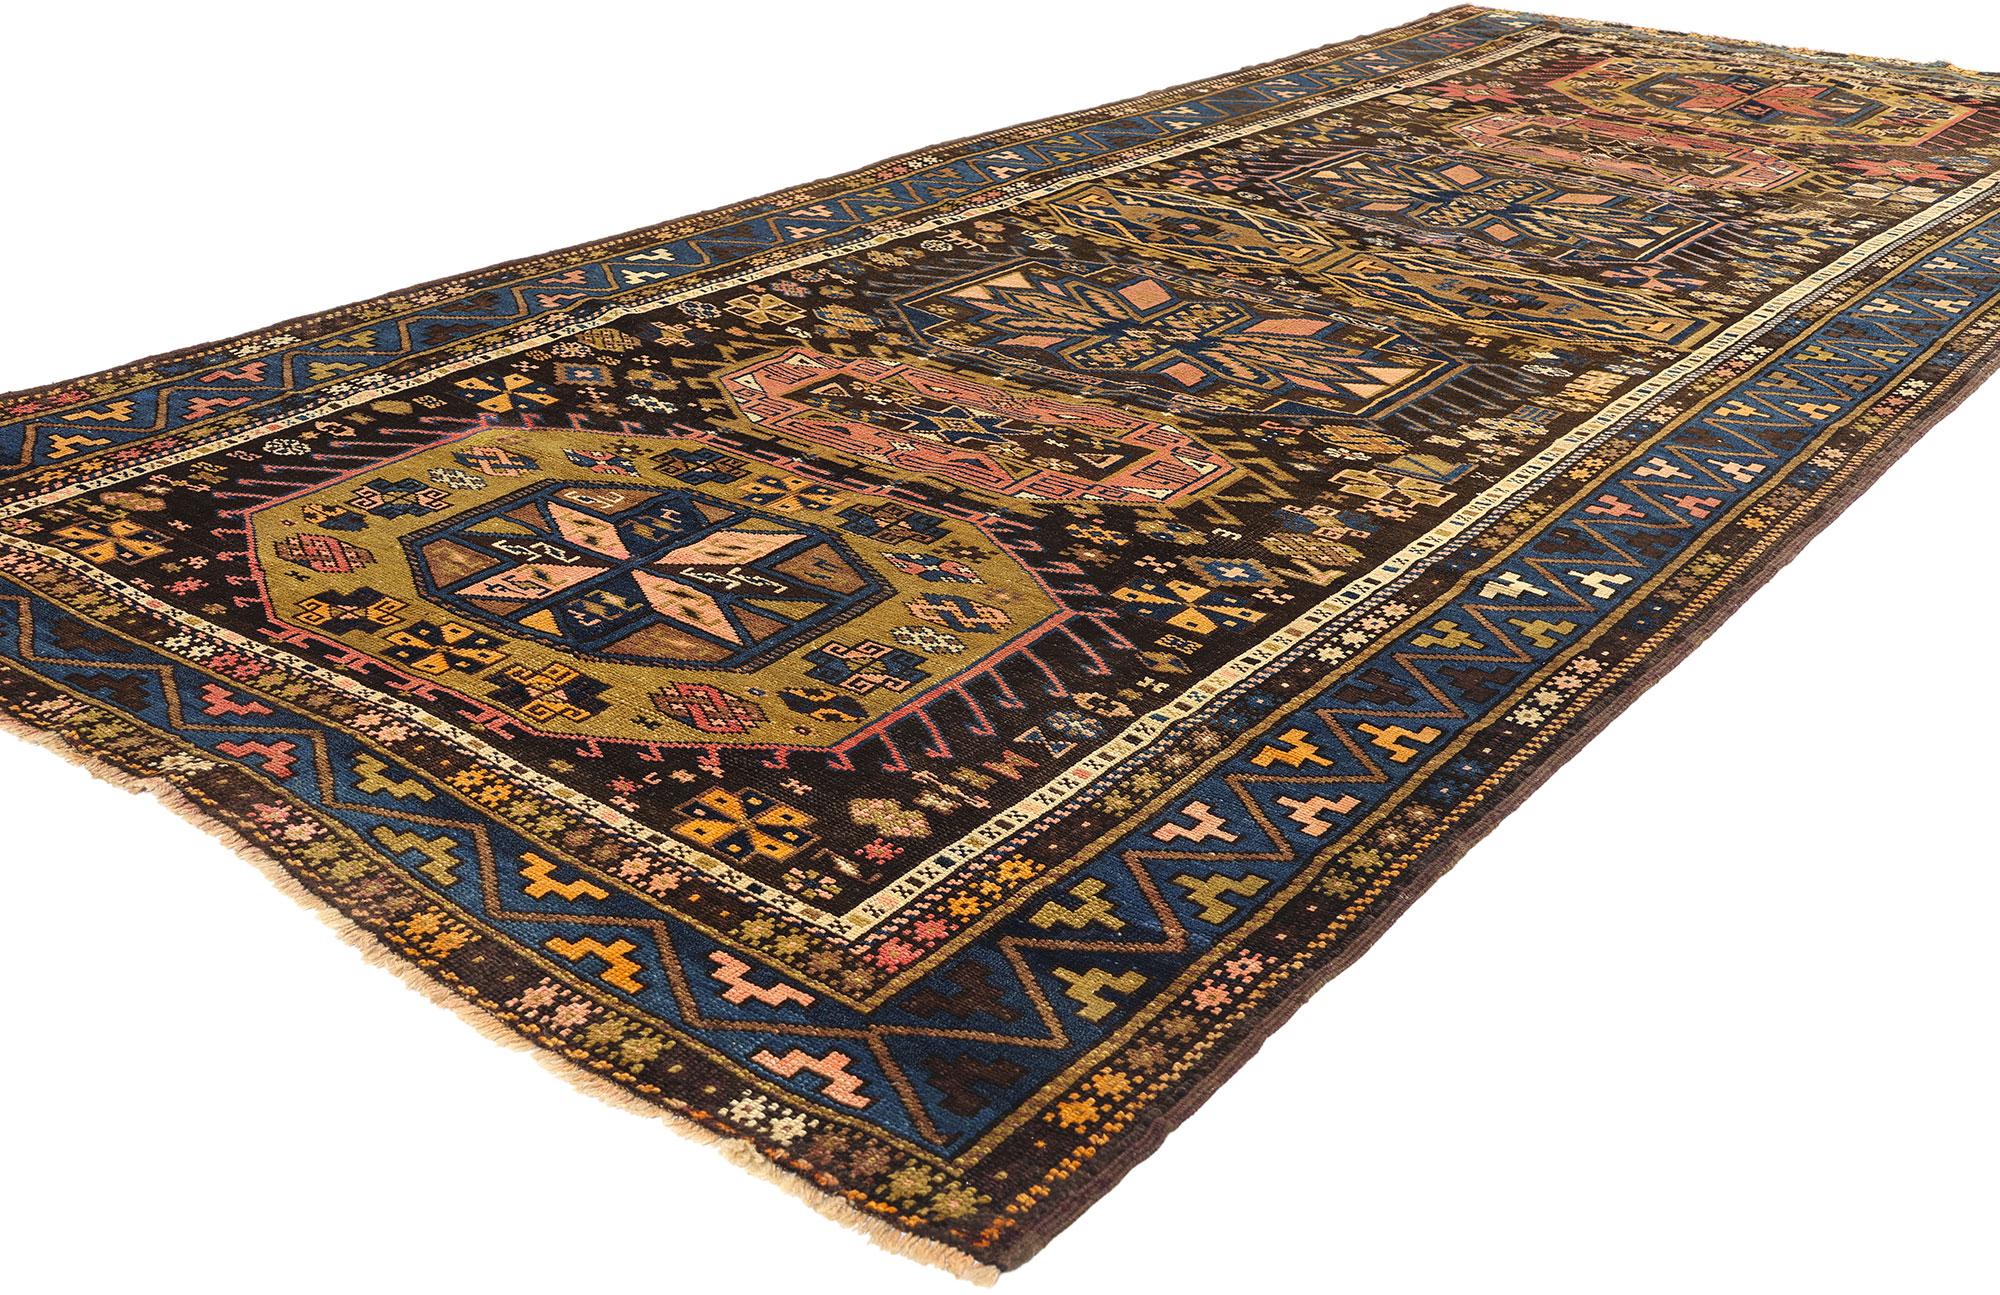 78770 Antique Caucasian Baku Rug, 05'04 x 12'10. Caucasian Baku rugs are a type of rug originating from the Caucasus region, particularly from the city of Baku, which is the capital of Azerbaijan. These rugs are renowned for their intricate designs,